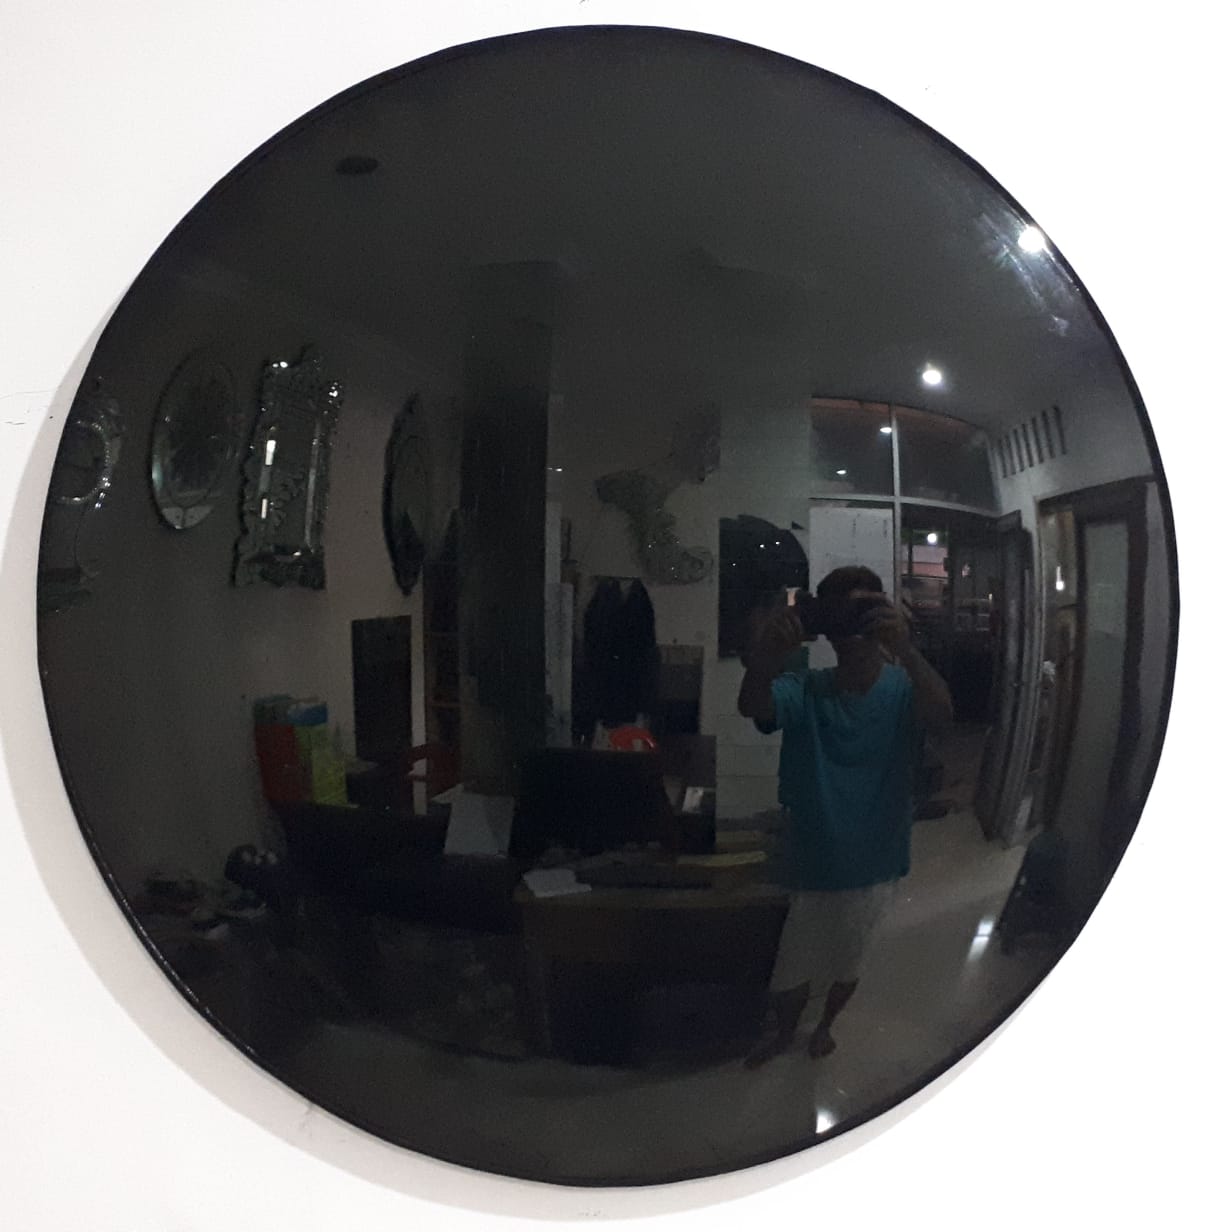 Minimalist Bedroom No Problem, As long as there is a Convex Mirror Round